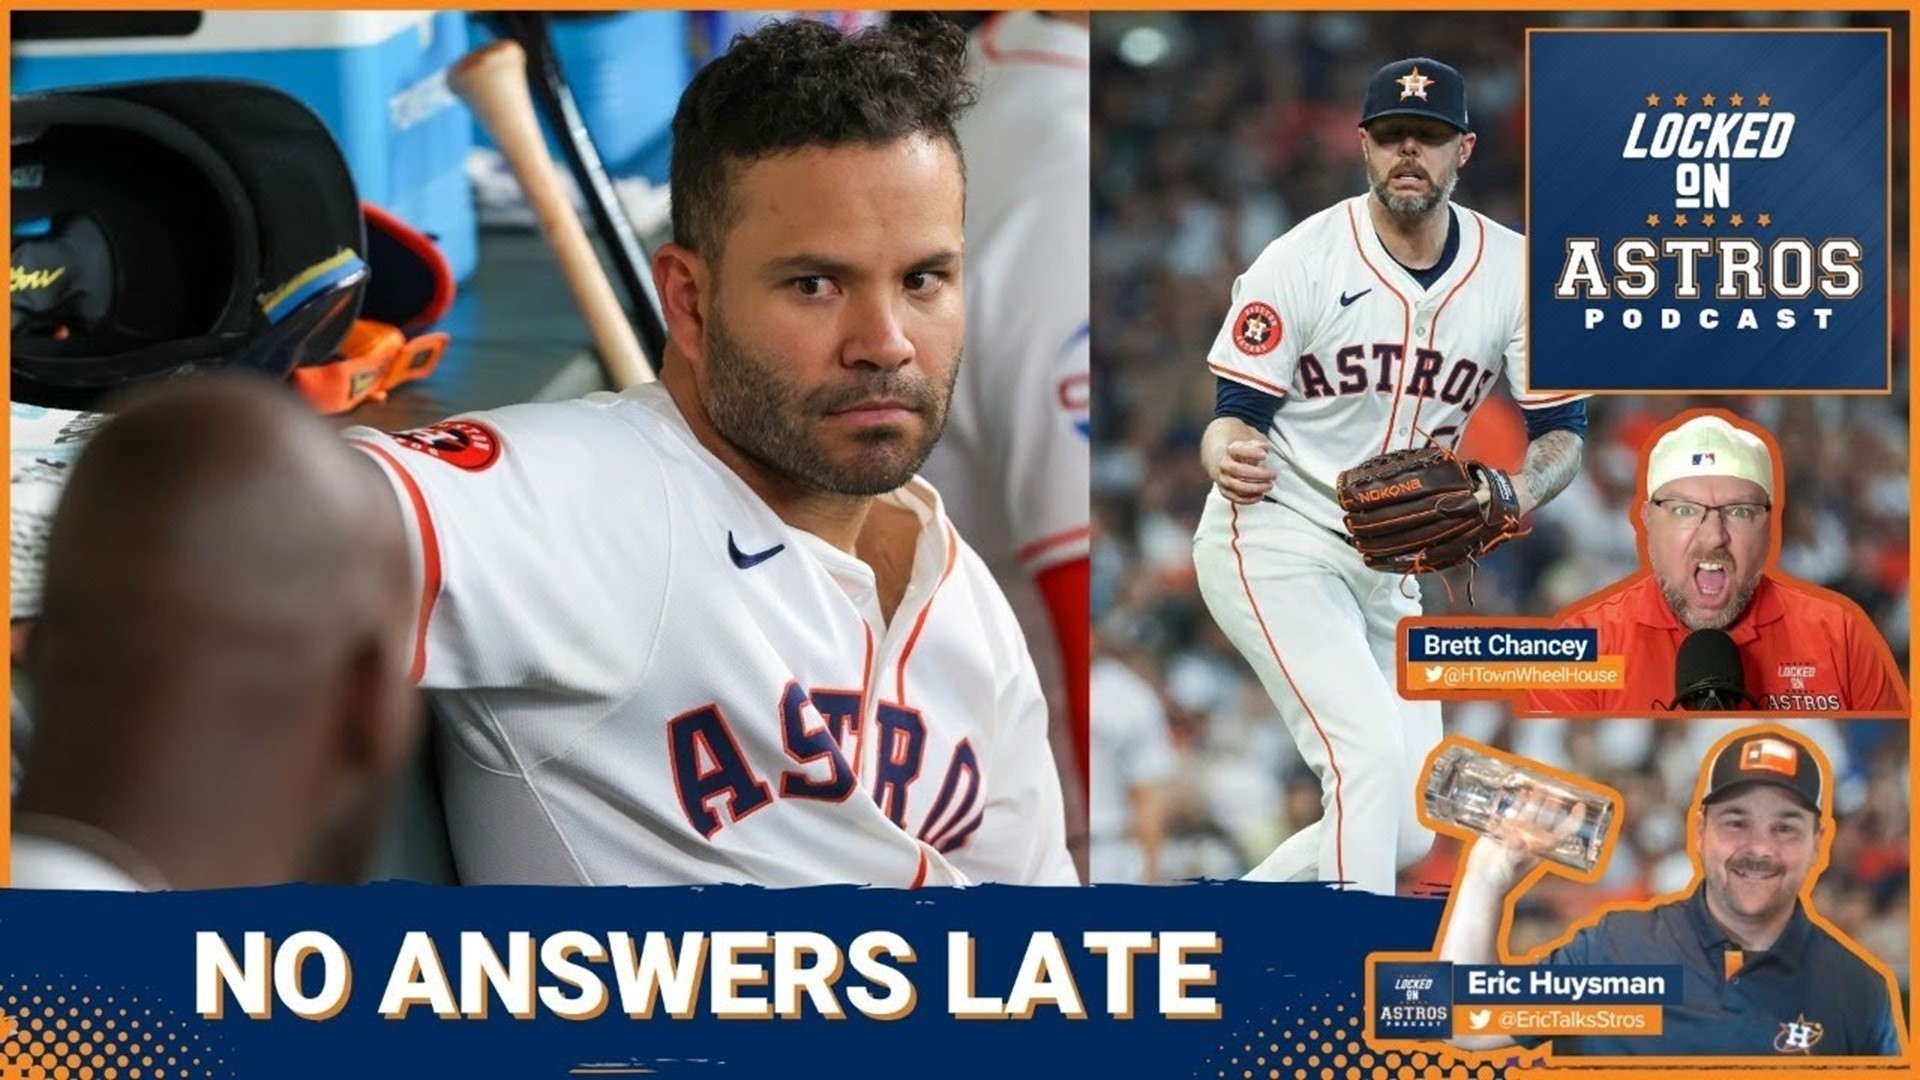 Join Eric Huysman and Brett Chancey for the Locked On Astros podcast as they discuss the Astros latest loss.